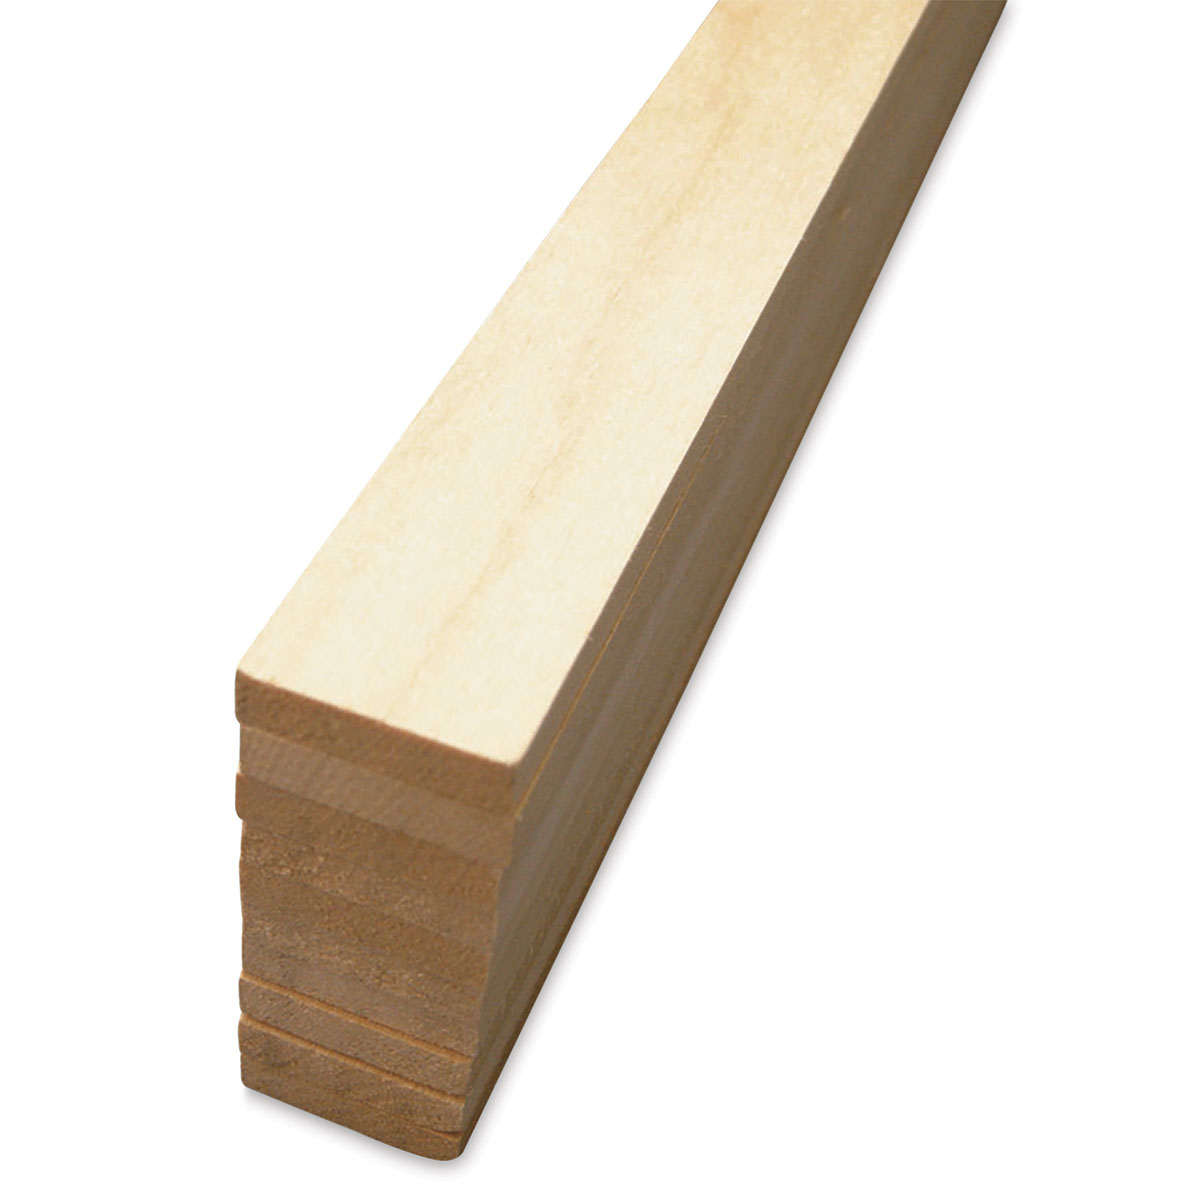 Midwest Products Basswood Sheets - 10 Pieces, 1/4'' x 1'' x 24